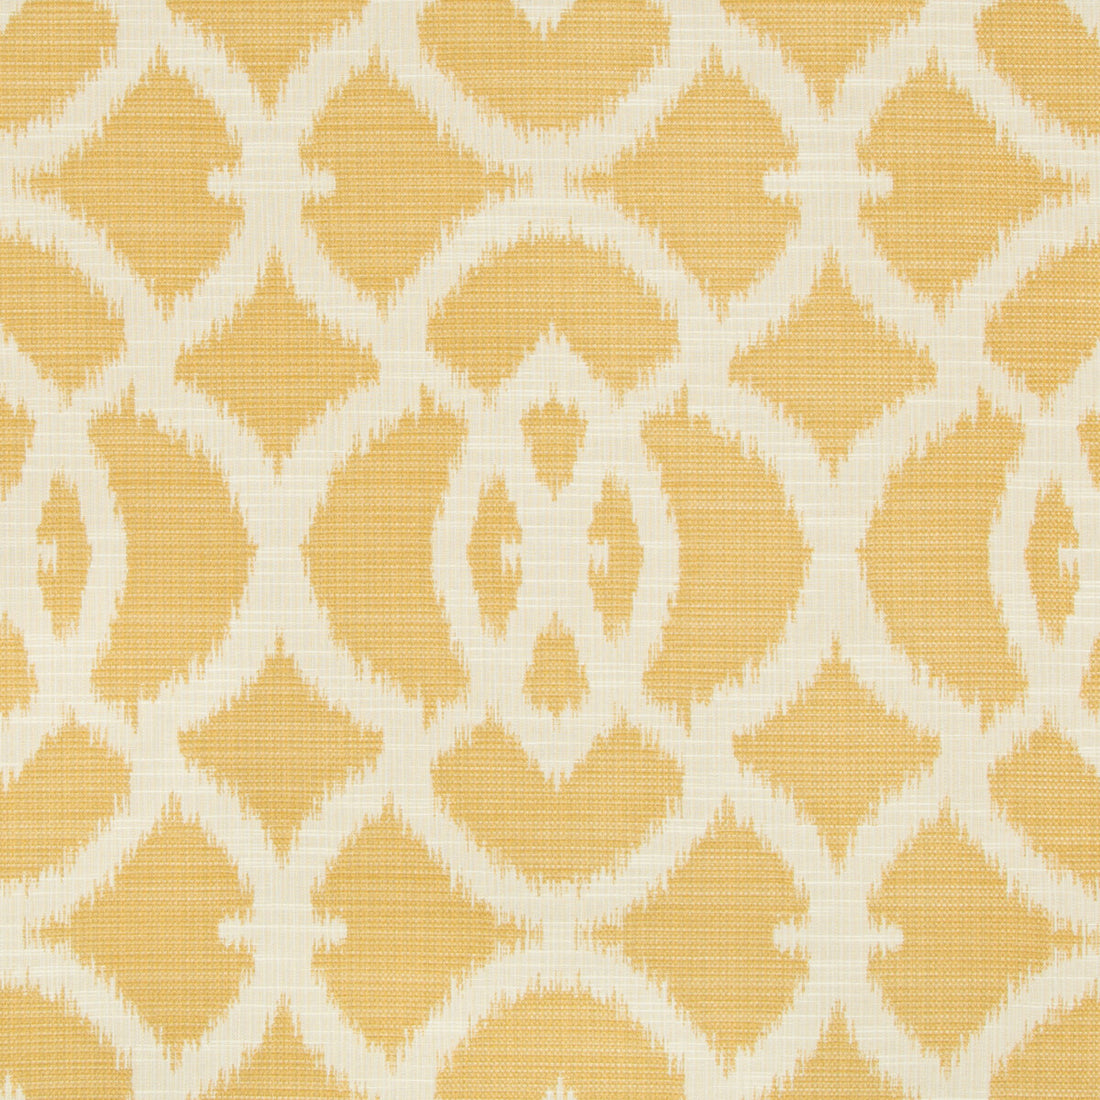 Kravet Contract fabric in 34749-4 color - pattern 34749.4.0 - by Kravet Contract in the Gis collection